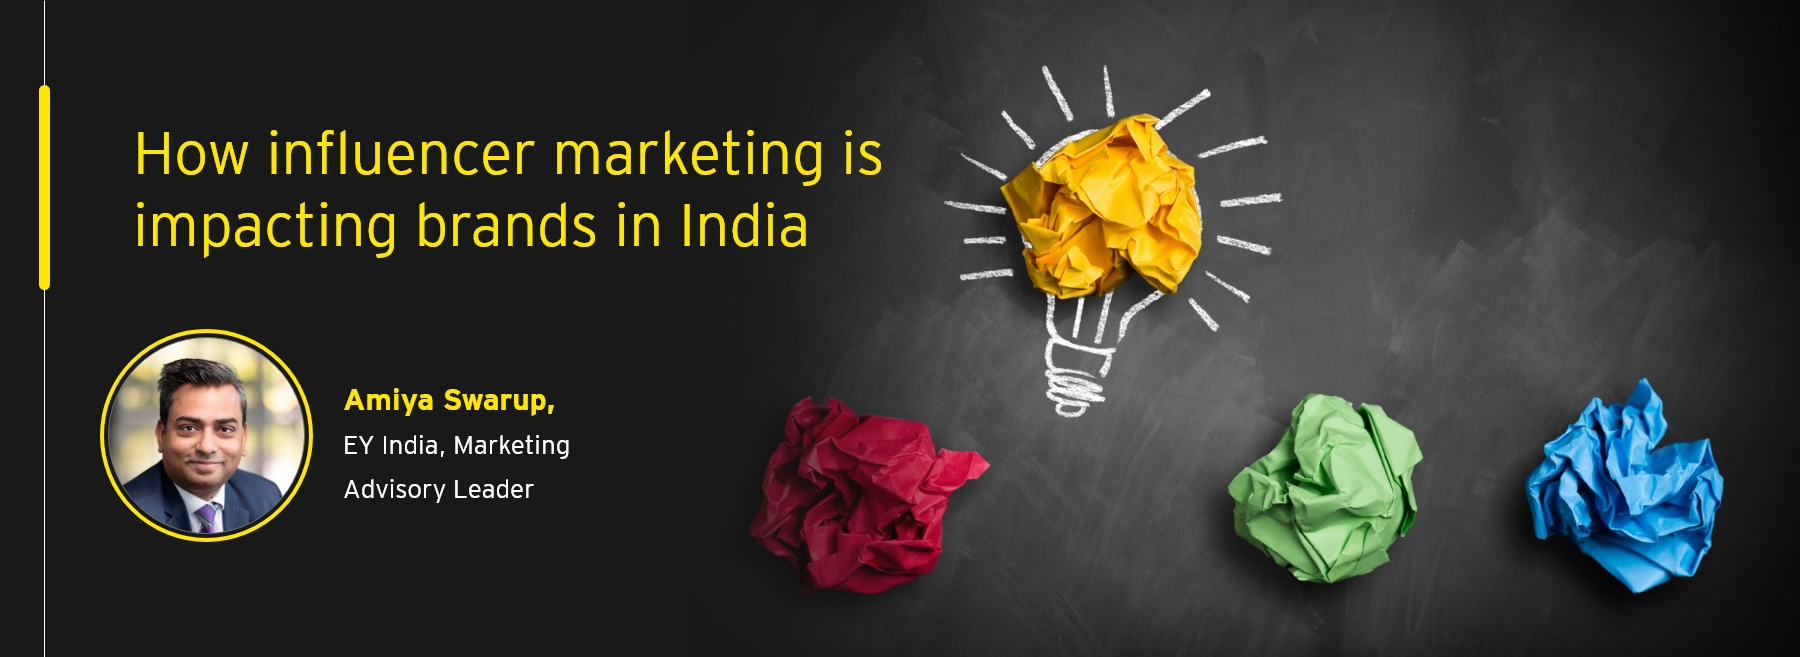 How influencer marketing is impacting brands in India